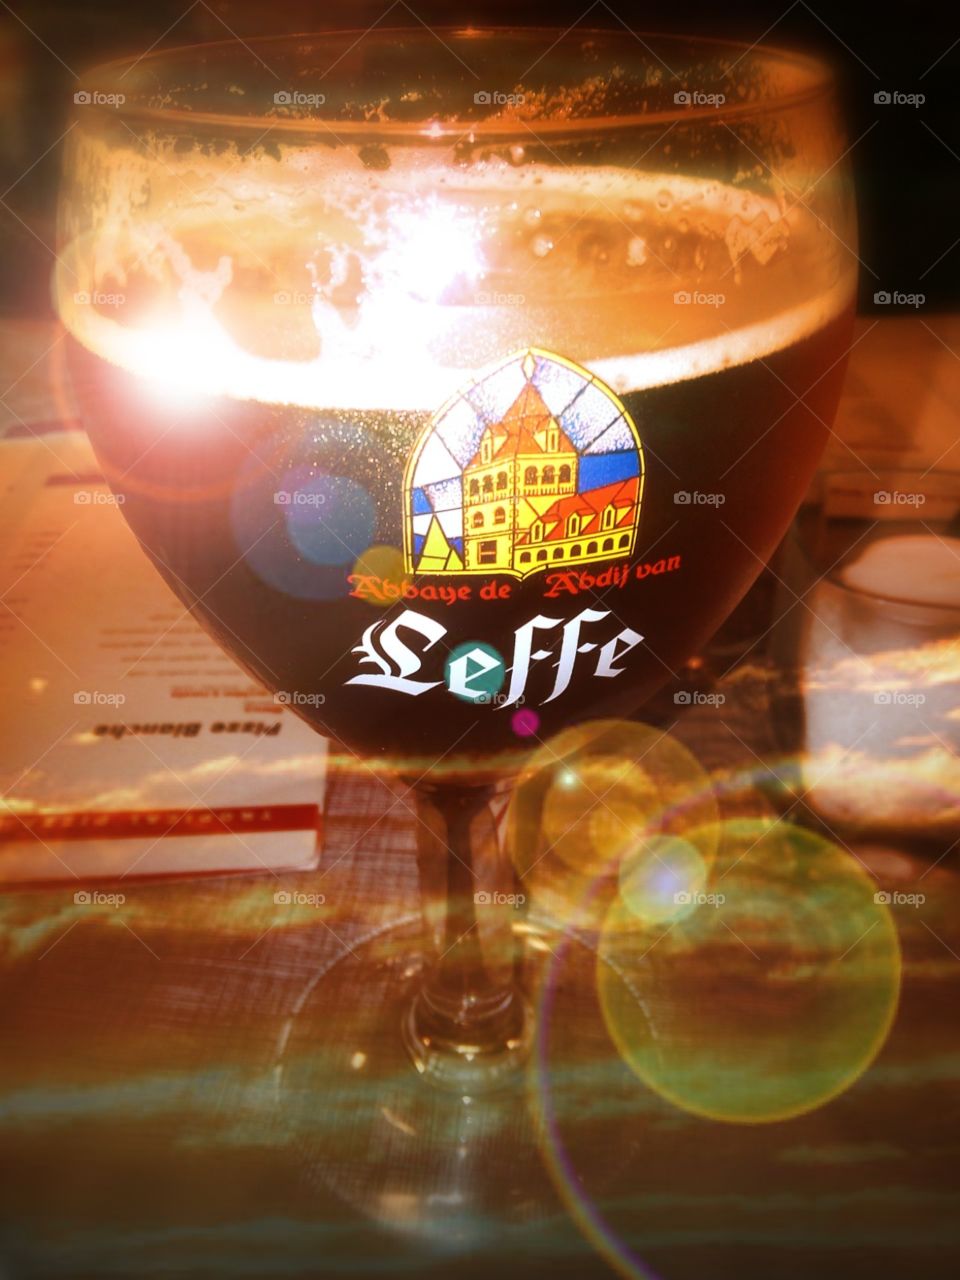 LEFFE.....THE BEER